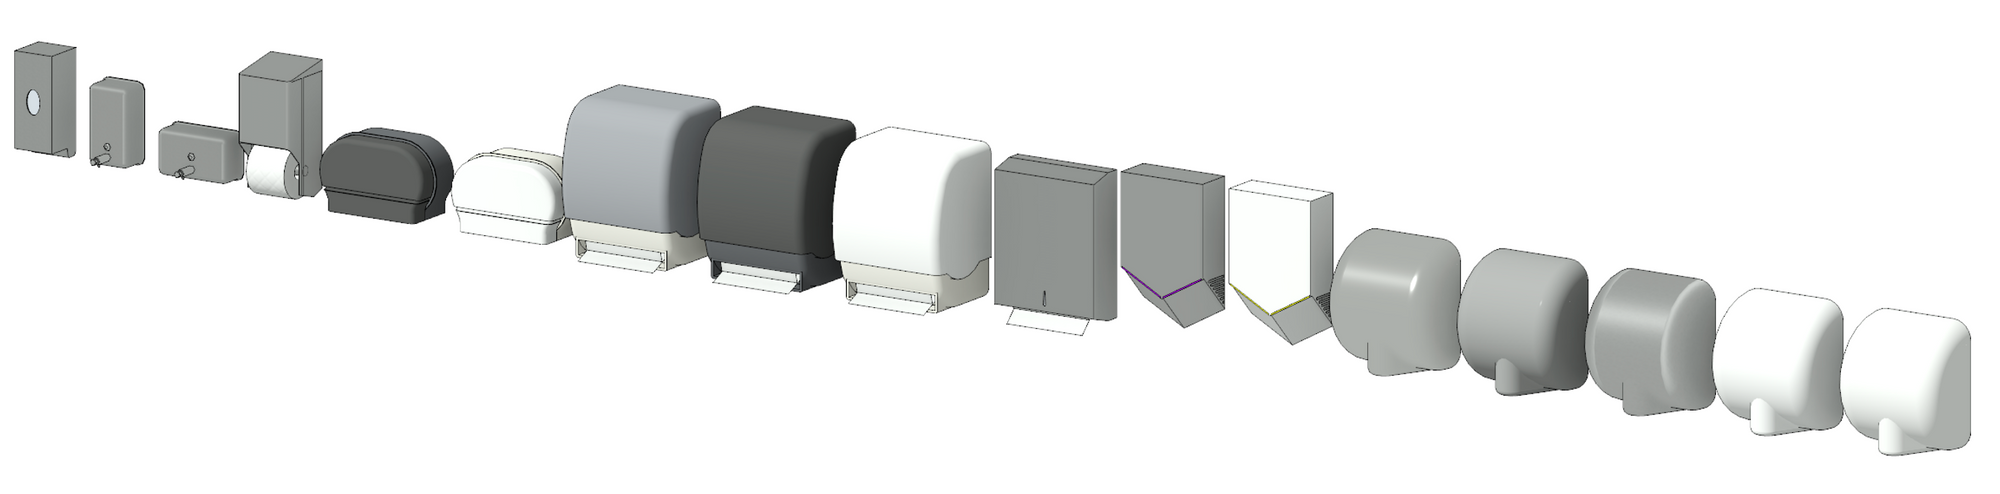 Revit 3D view of all accessories in Fine level of detail.